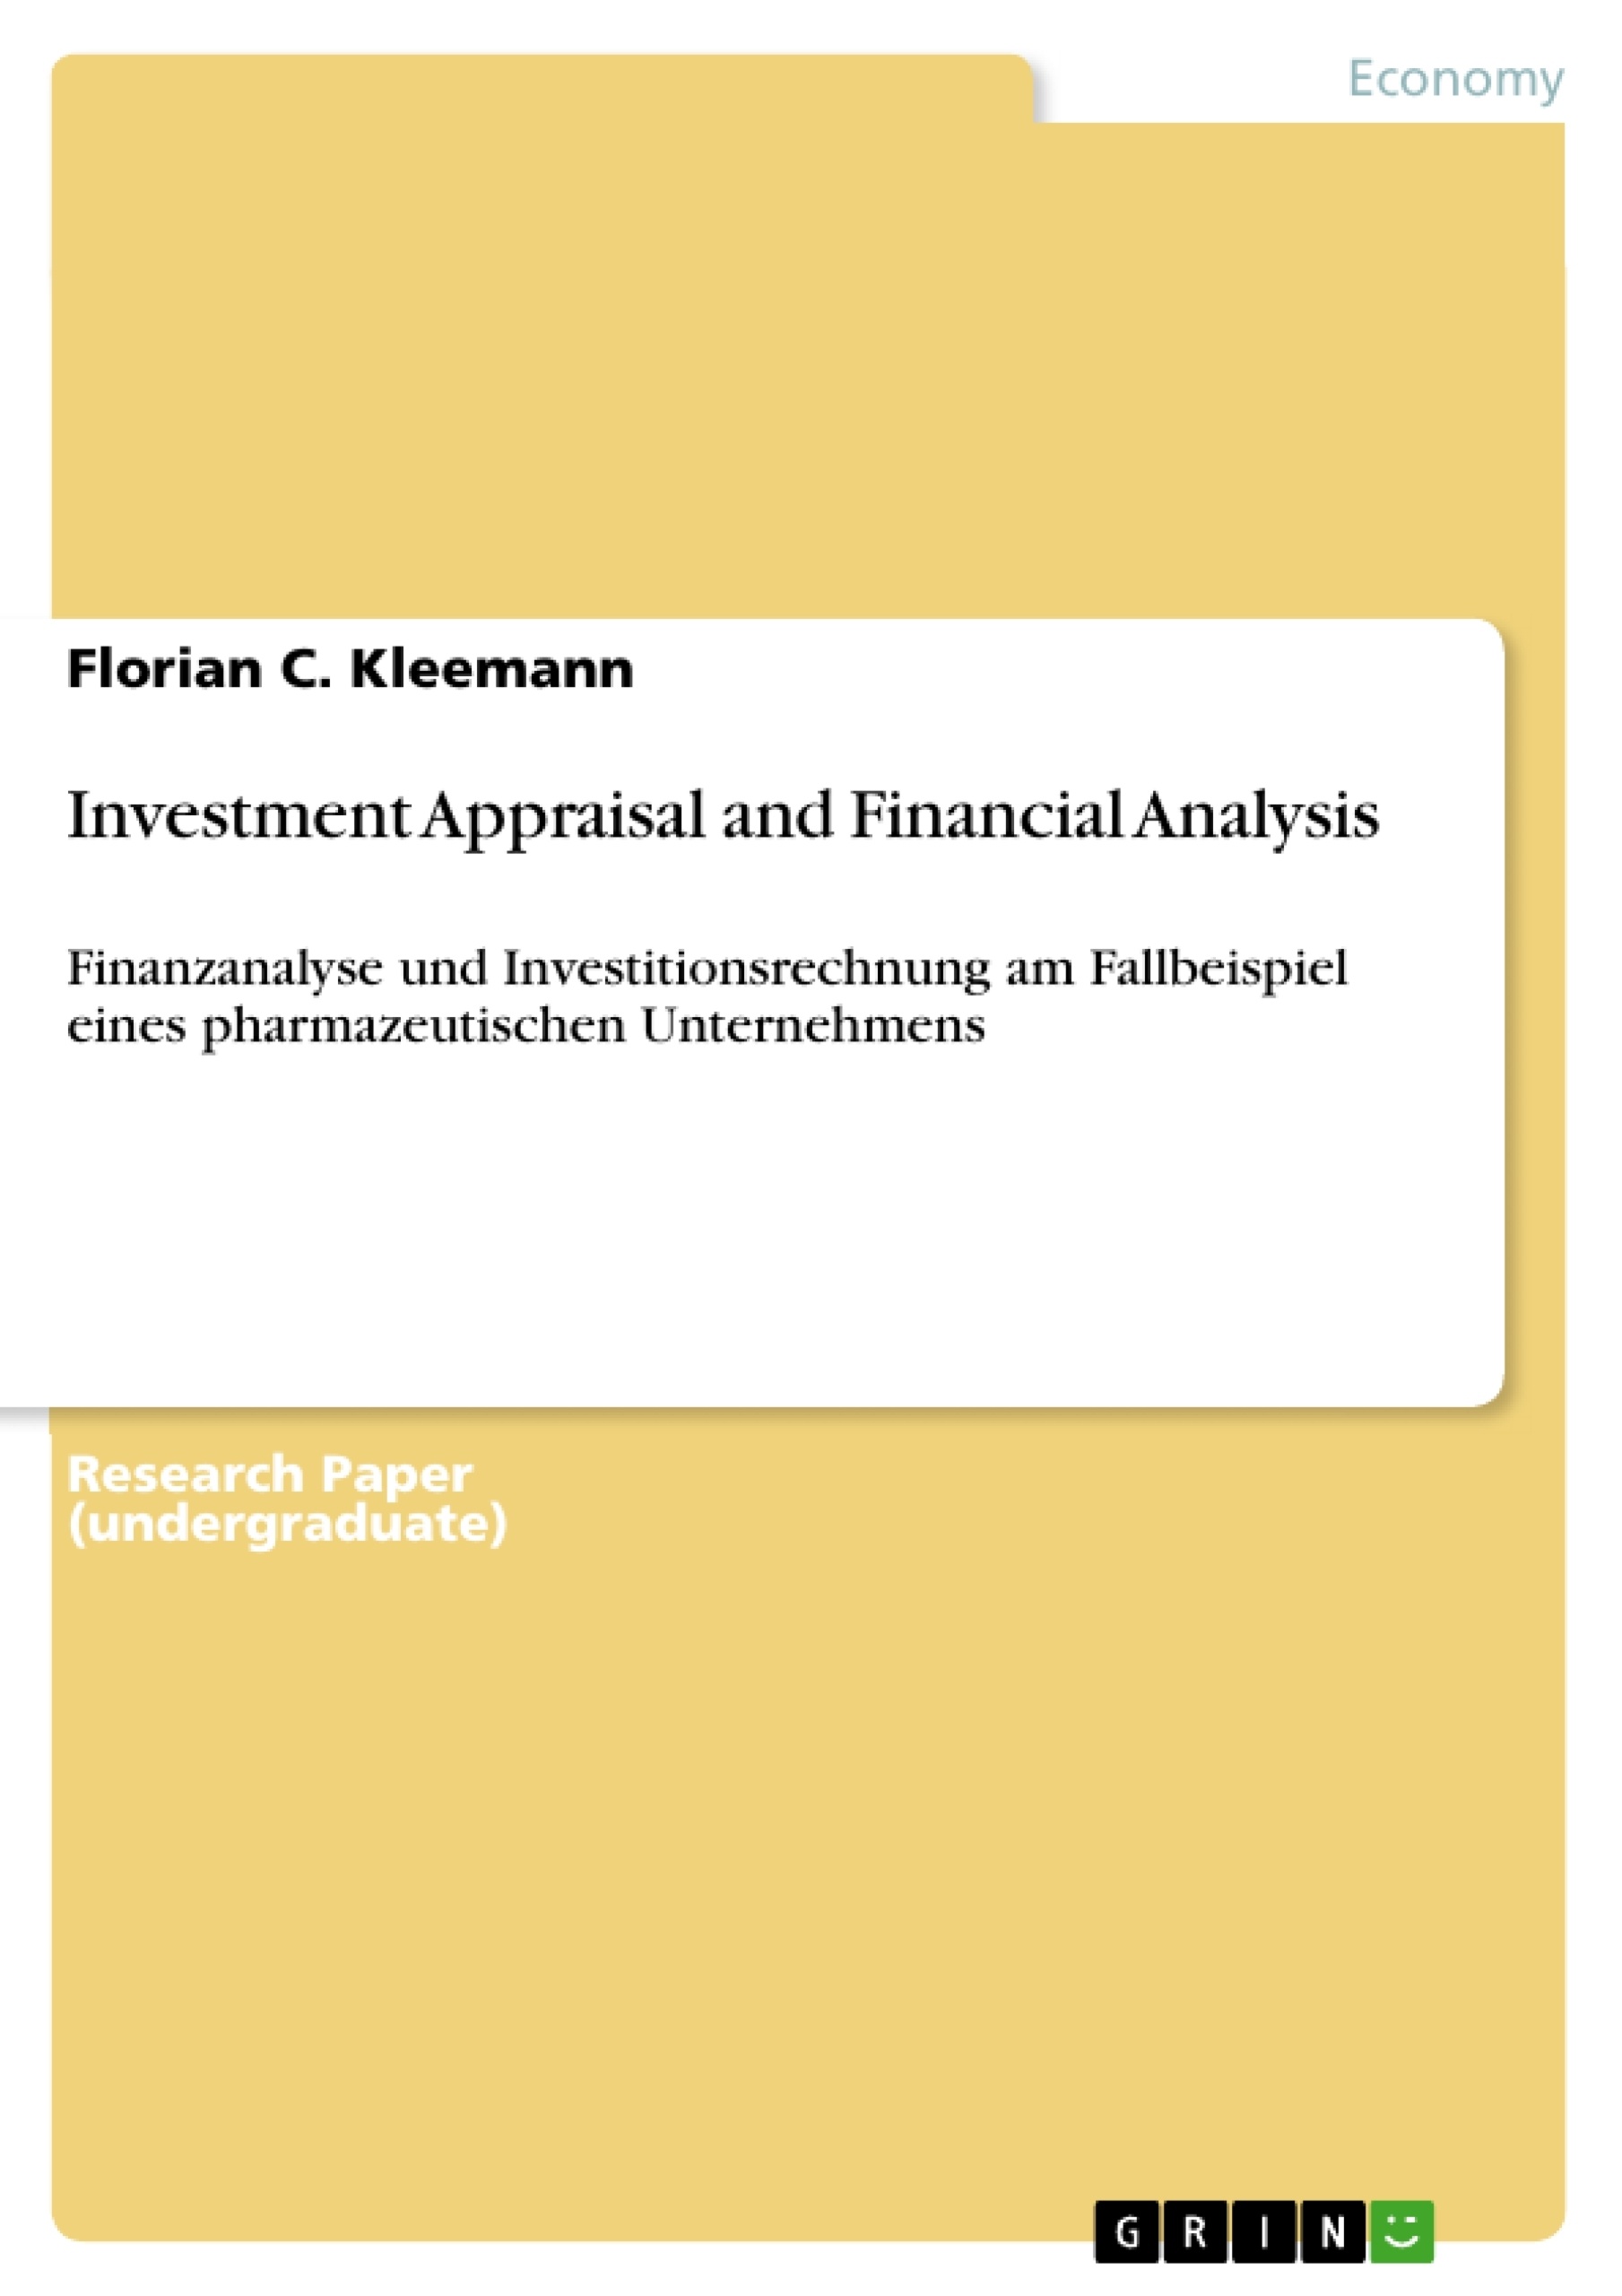 Title: Investment Appraisal and Financial Analysis